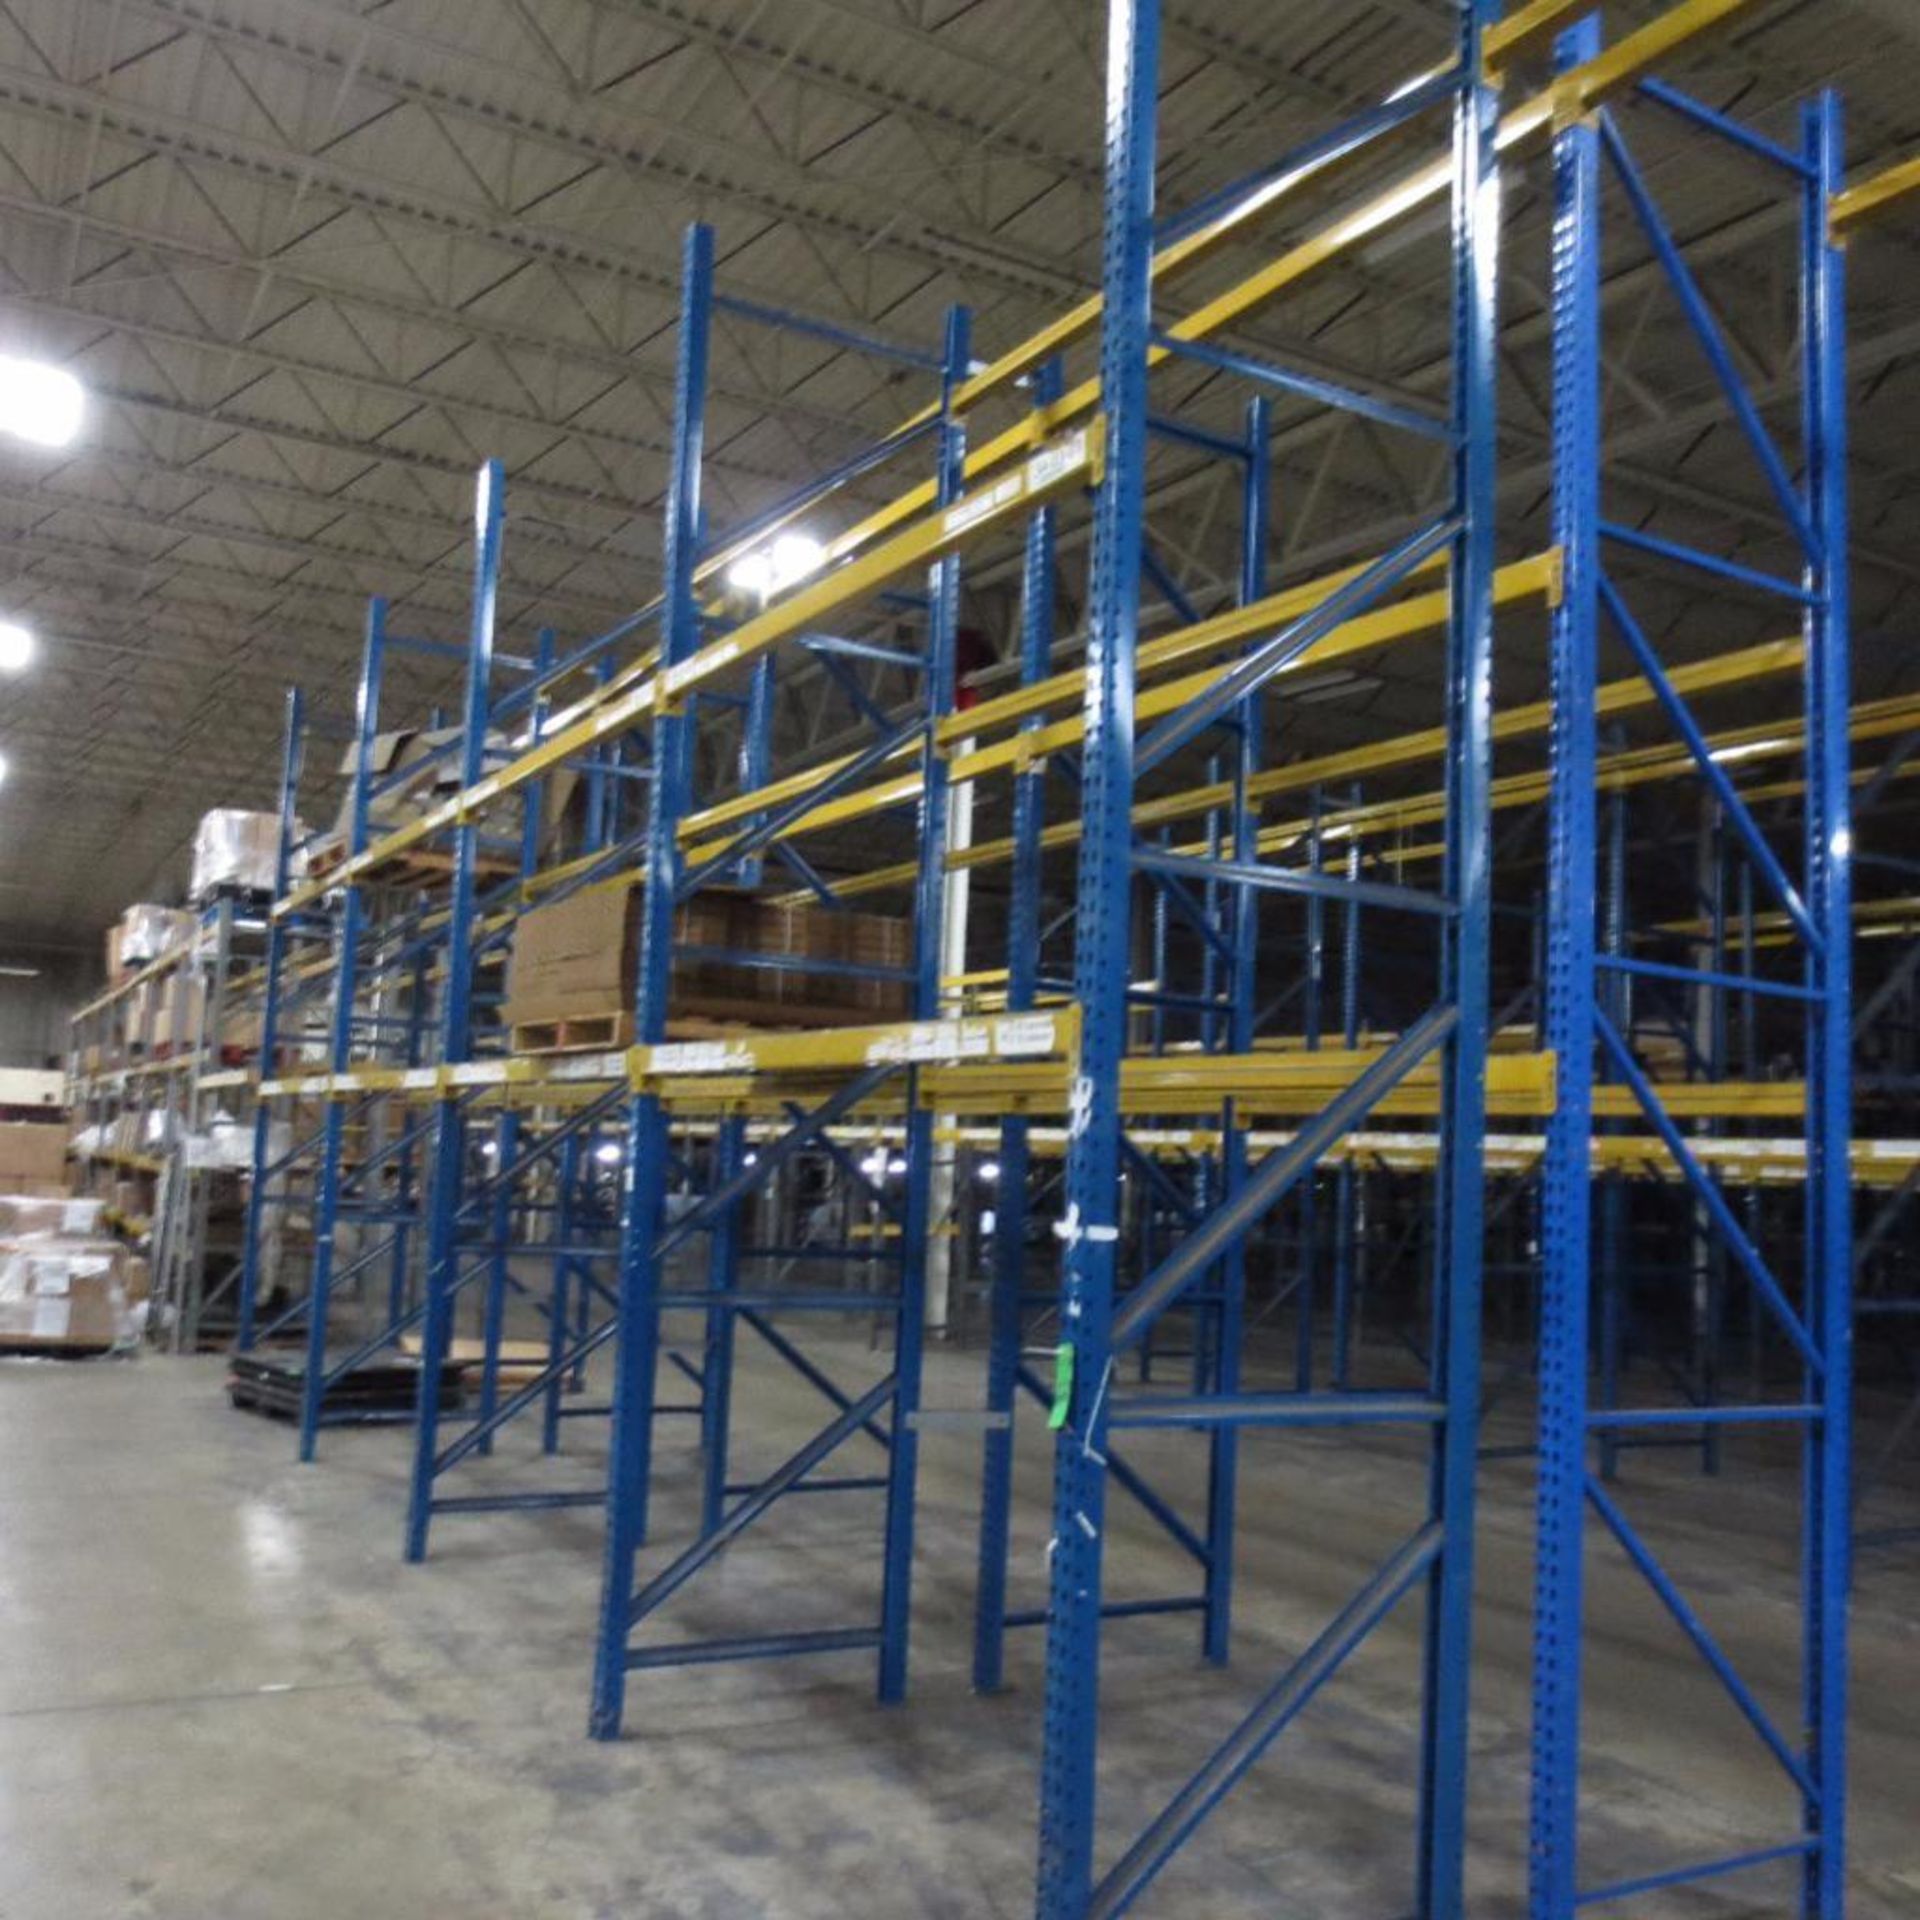 (40) Section of Pallet Racking, (28) Legs 16' X 42", (16) 12' X 42, Apx. 210 Cross Beams 8'